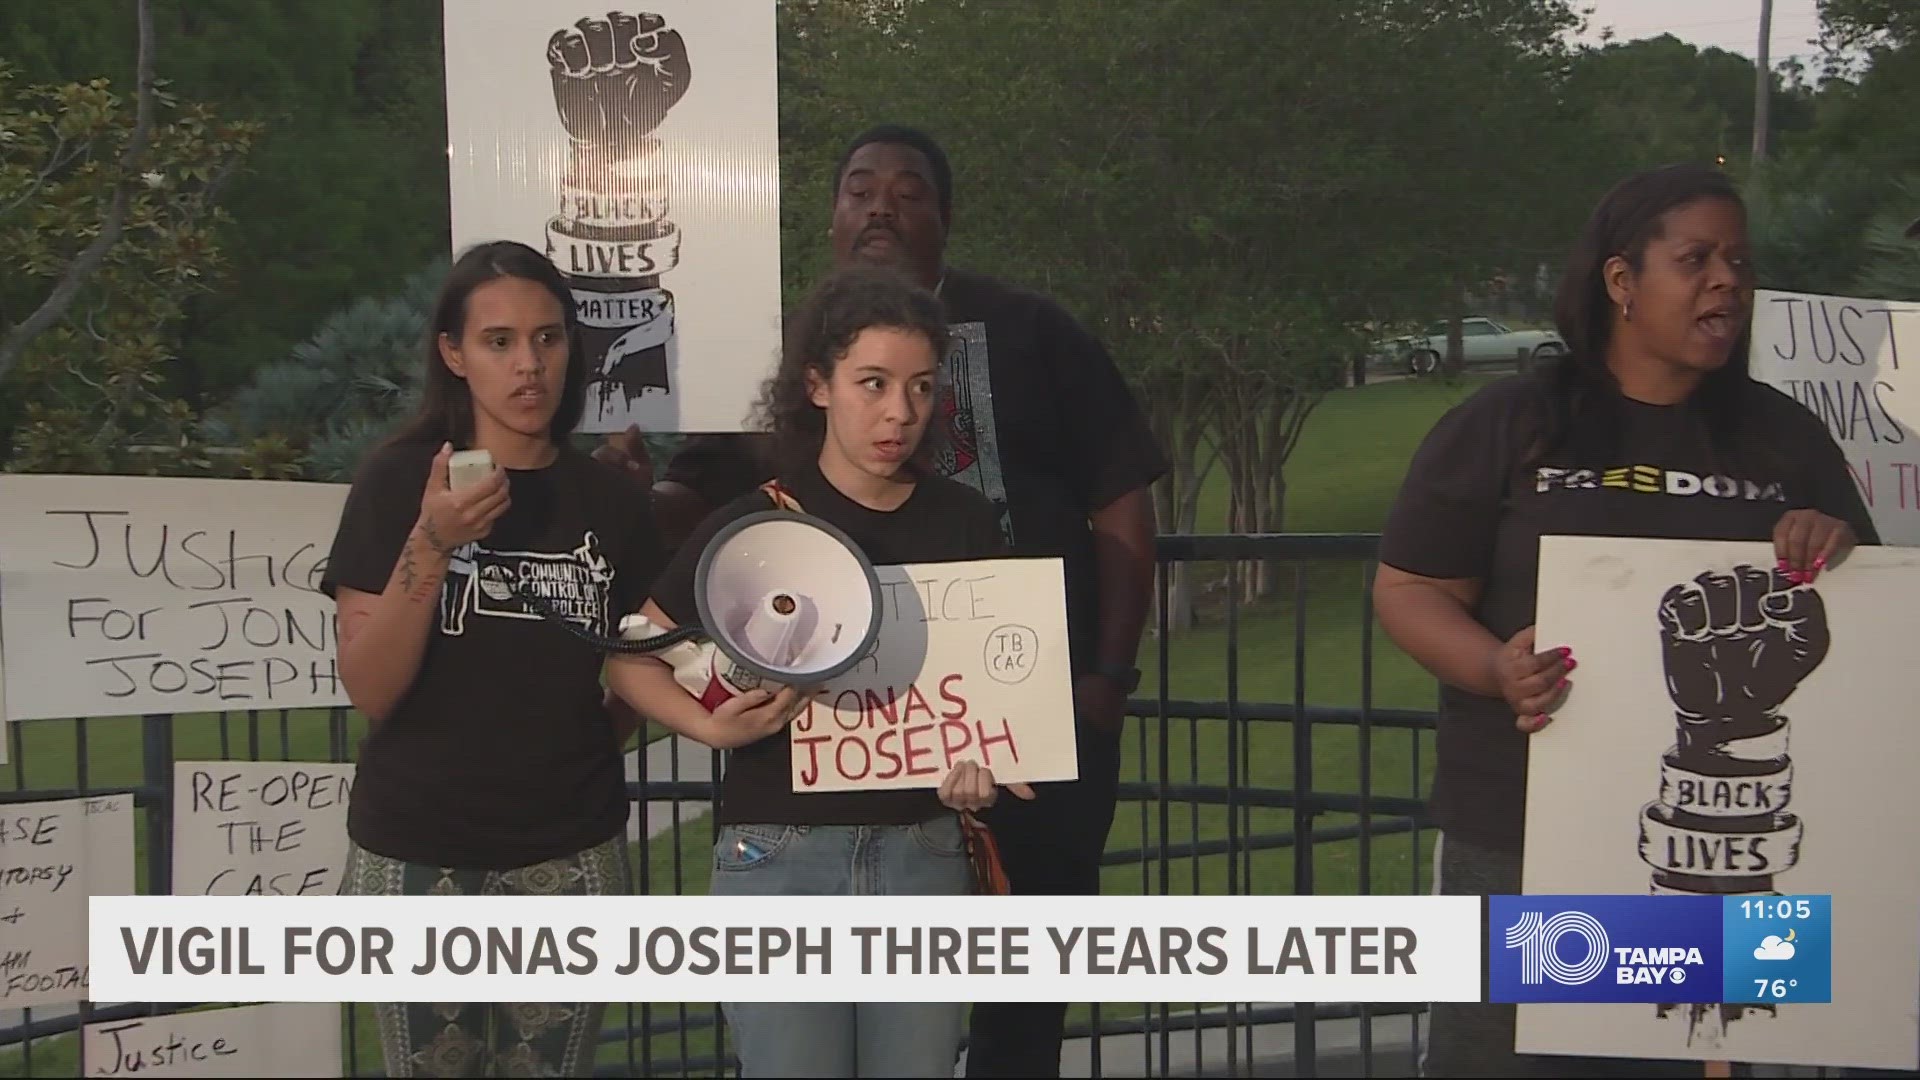 Tampa Police say three years ago, Jonas Joseph pointed a gun at officers who then opened fire.